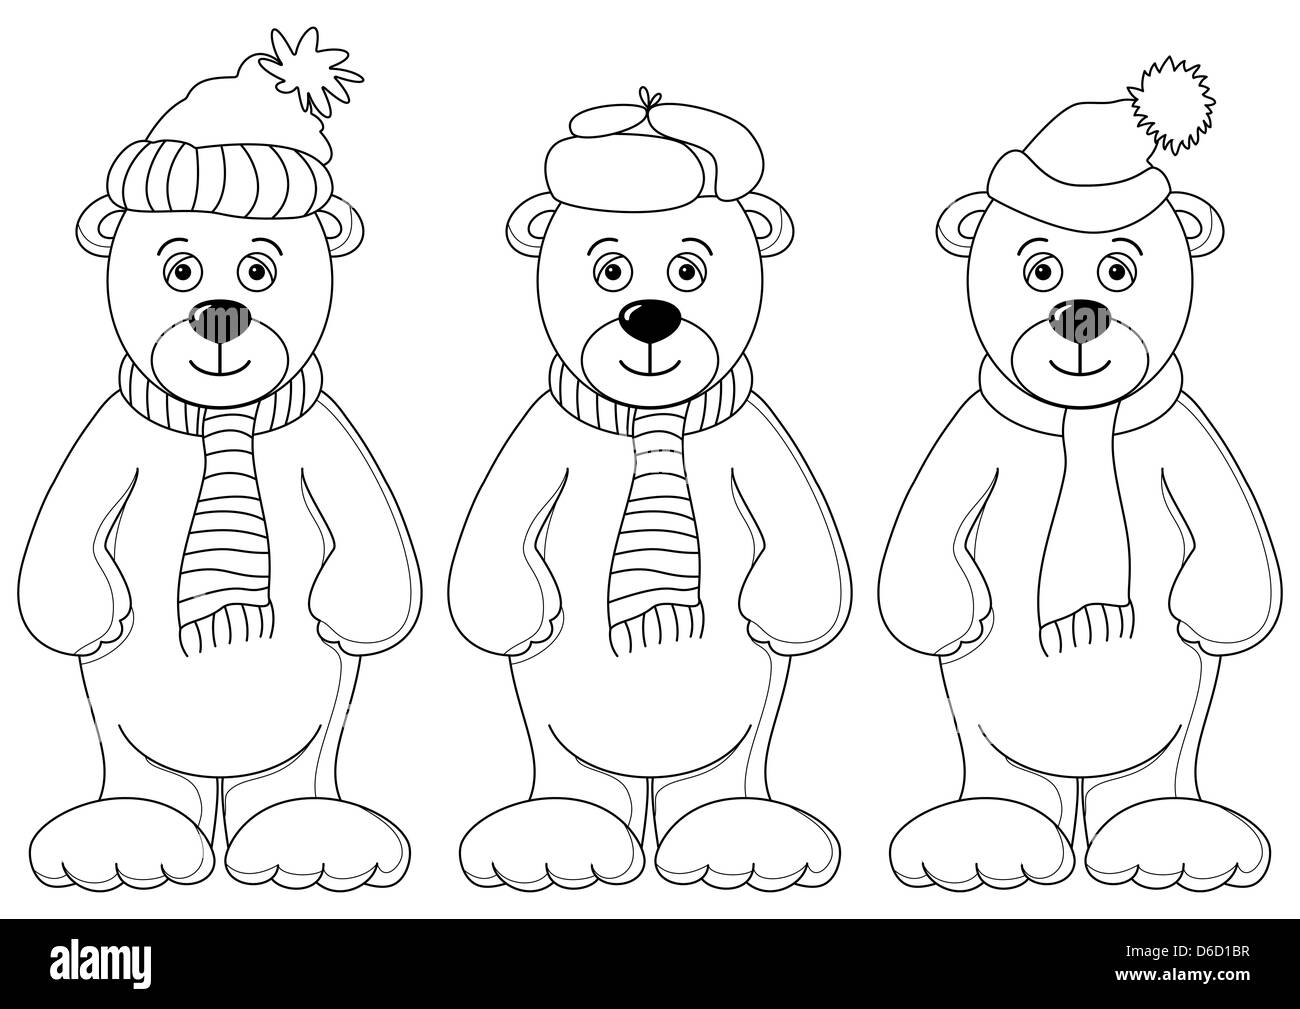 Teddy bears in winter costume, contours Stock Photo